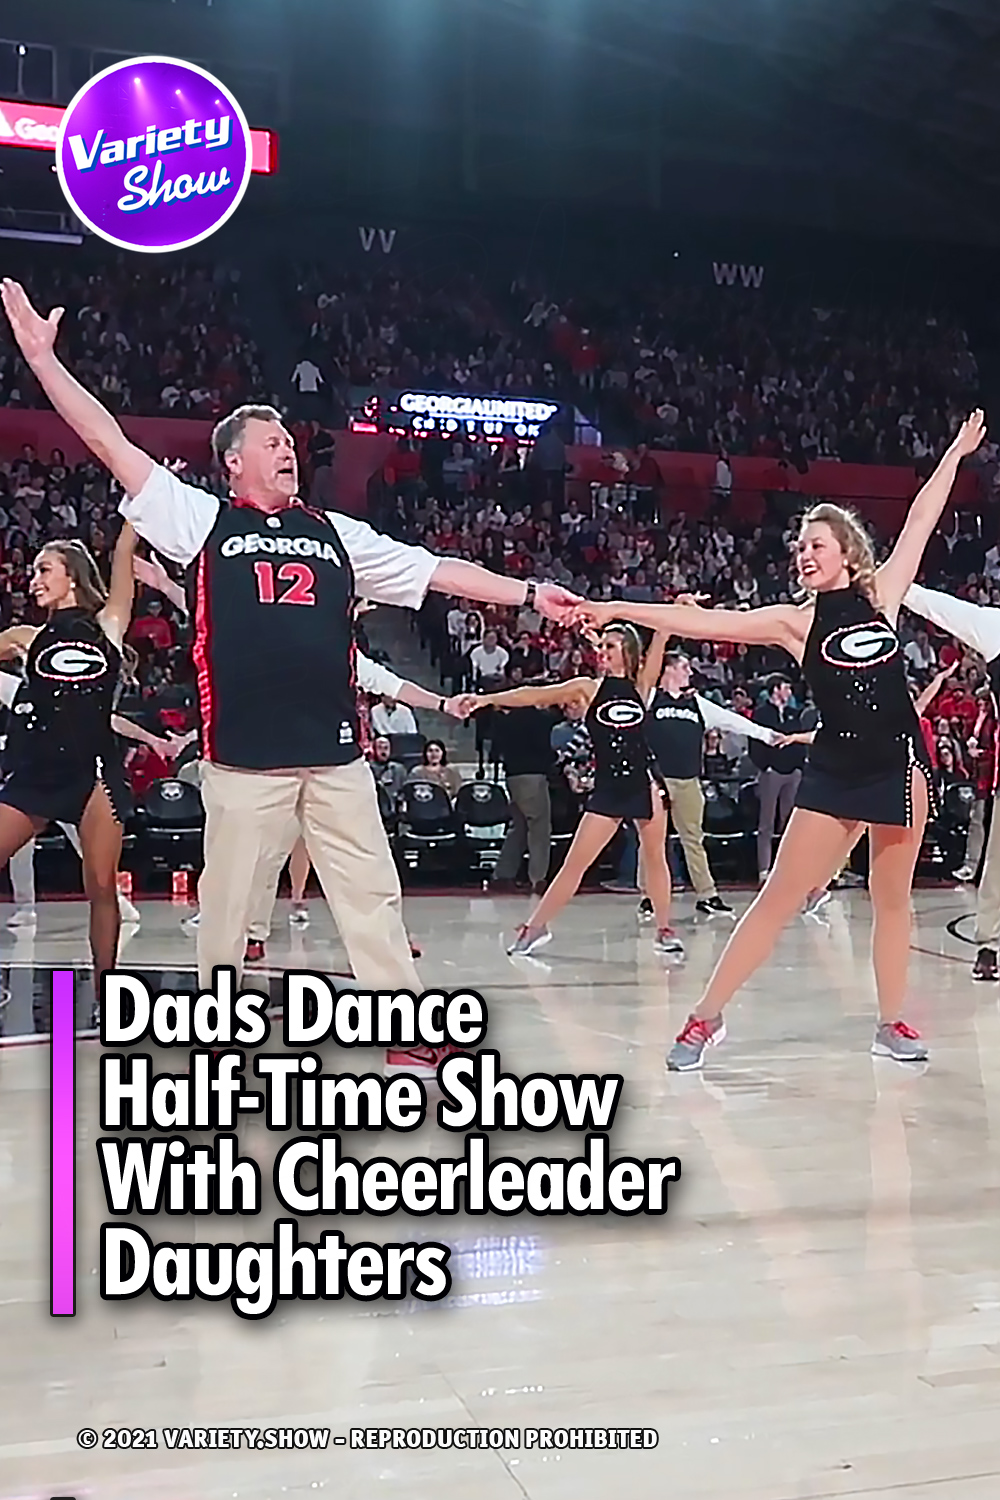 Dads Dance Half-Time Show With Cheerleader Daughters